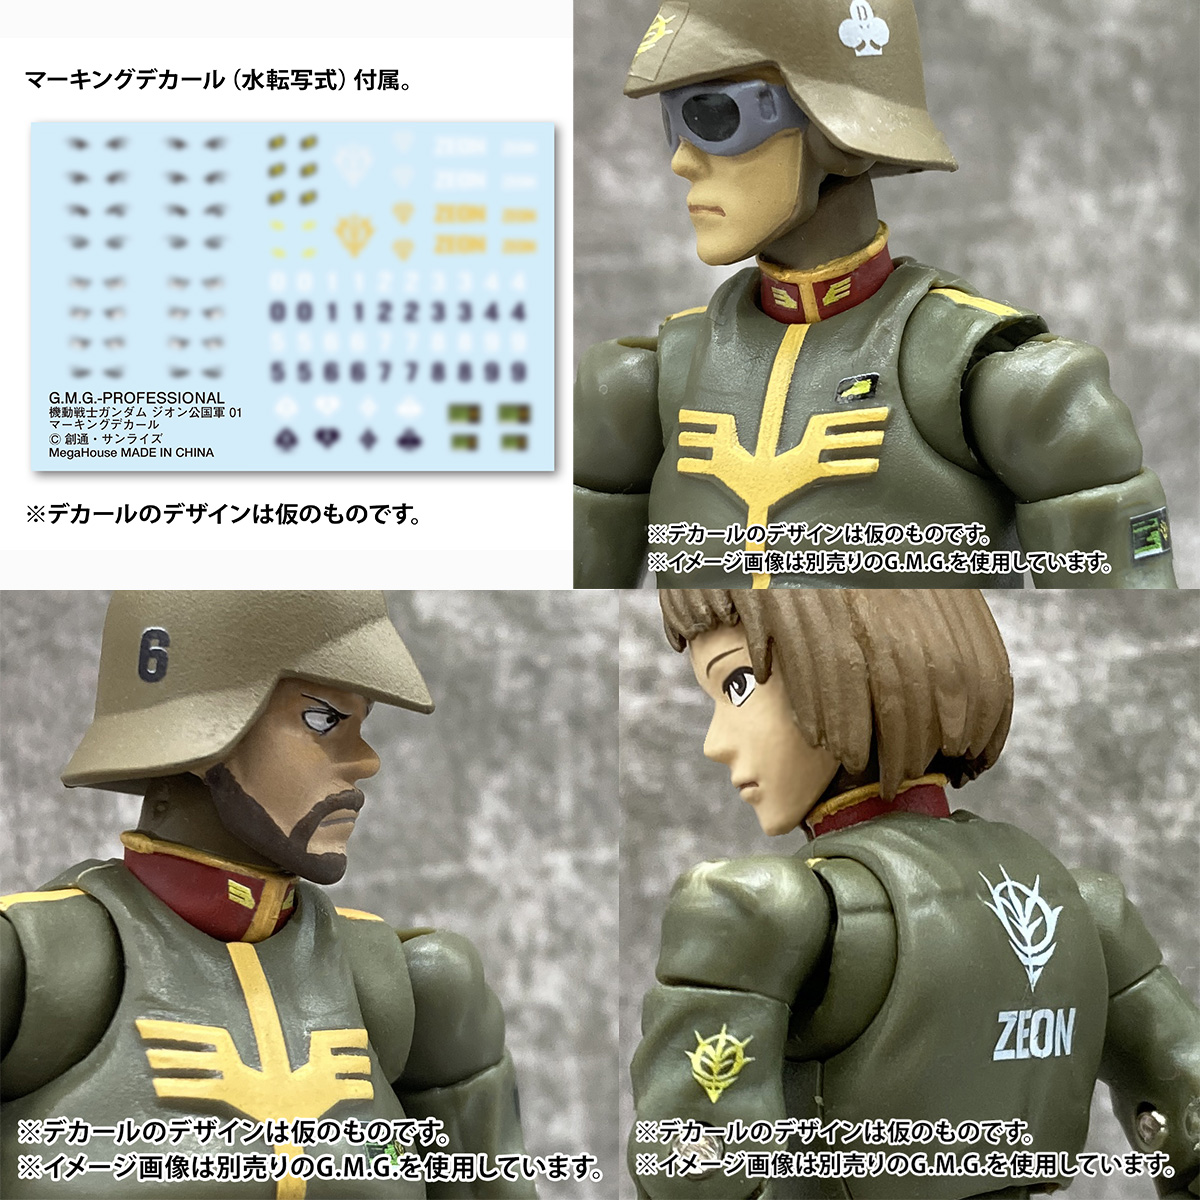 G.M.G. Professional Mobile Suit Gundam Principality Of Zeon General Soldier  01～03 Box Set | Gundam | Premium Bandai Singapore Online Store For Action  Figures, Model Kits, Toys And More